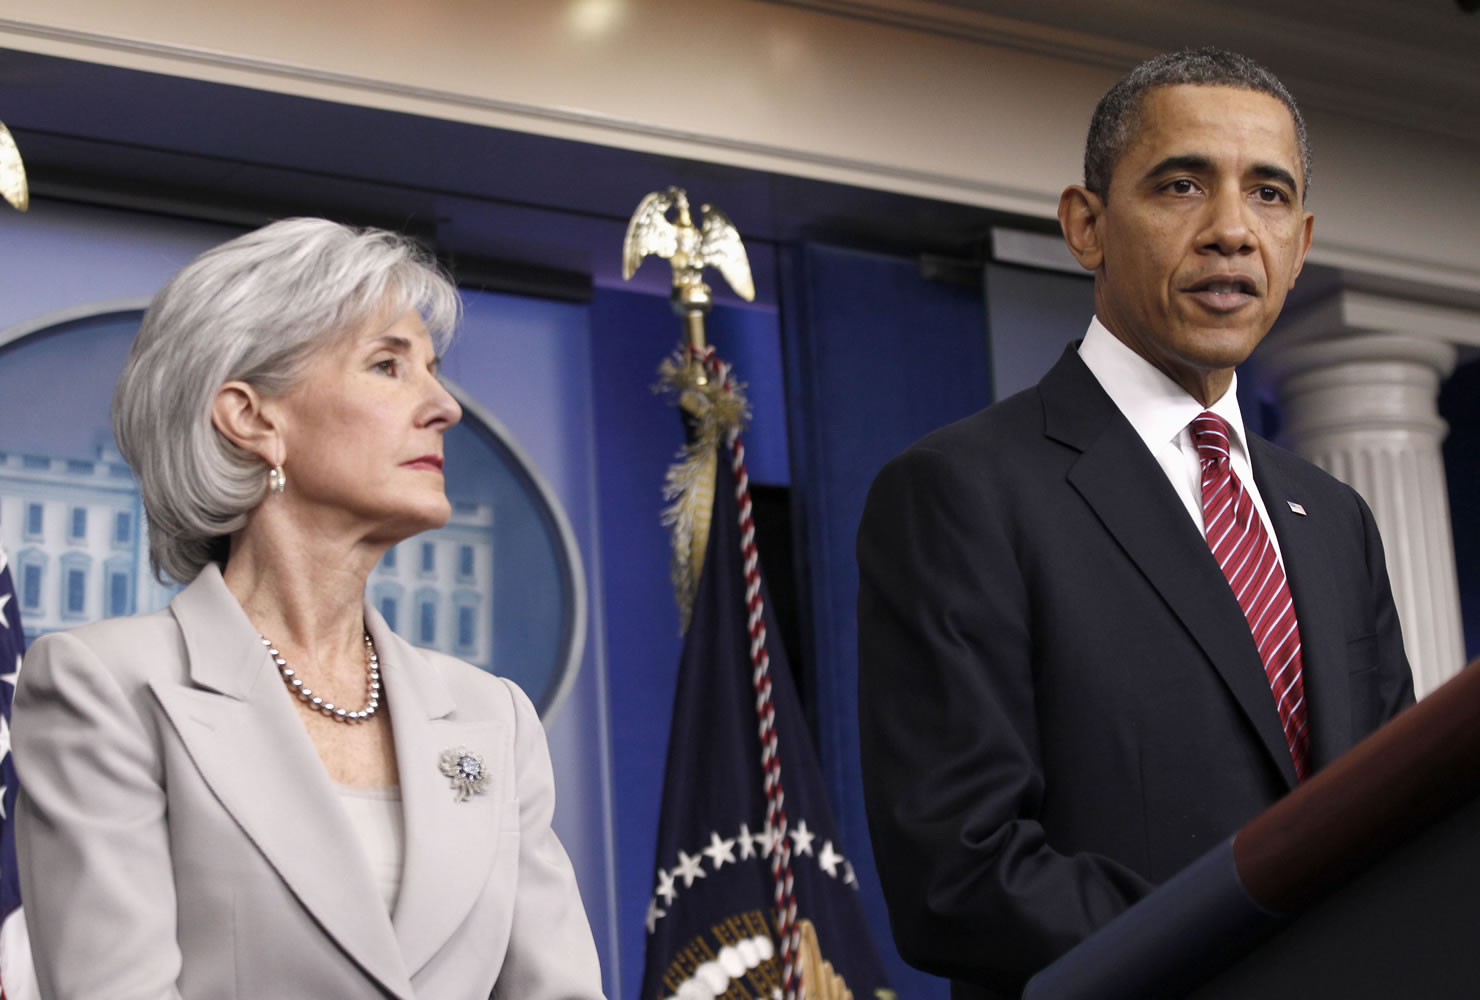 President Barack Obama, accompanied by Health and Human Services Secretary  Kathleen Sebelius announces the revamp of his contraception policy requiring religious institutions to fully pay for birth control, Friday, Feb. 10, 2012,  in the Brady Press Briefing Room of the White House in Washington.